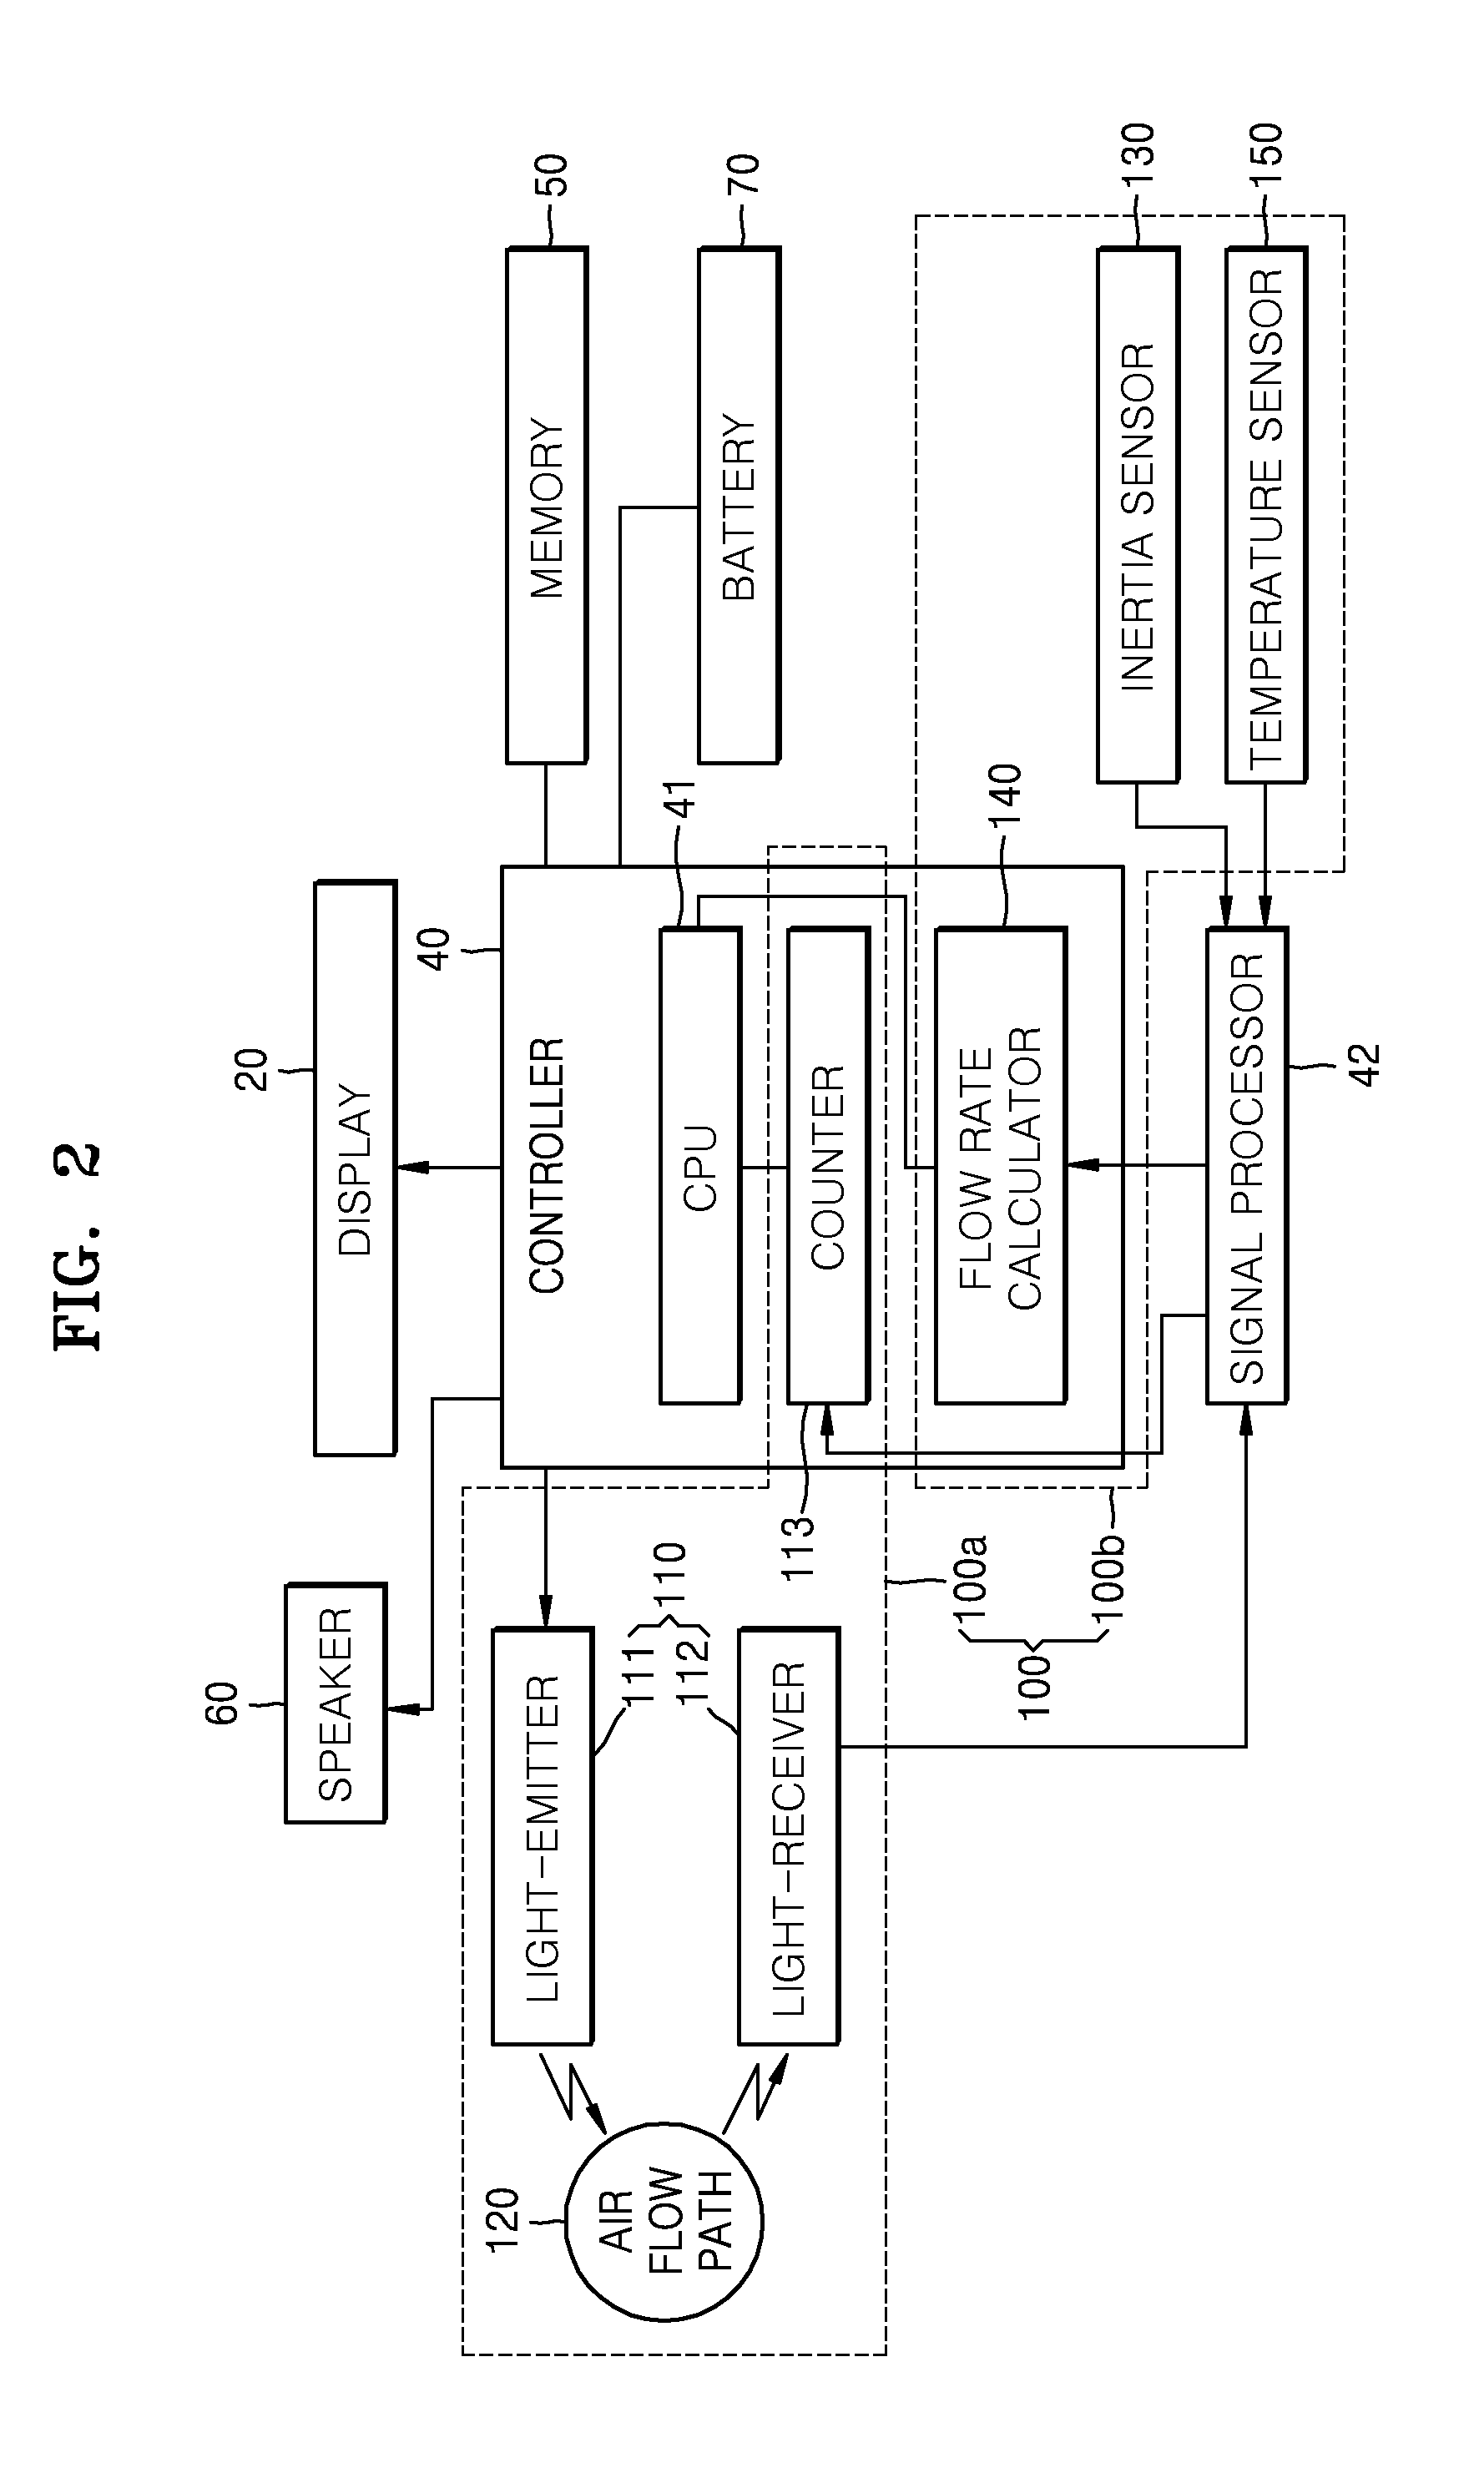 Mobile device which senses particulate matter and method of sensing particulate matter with the mobile device